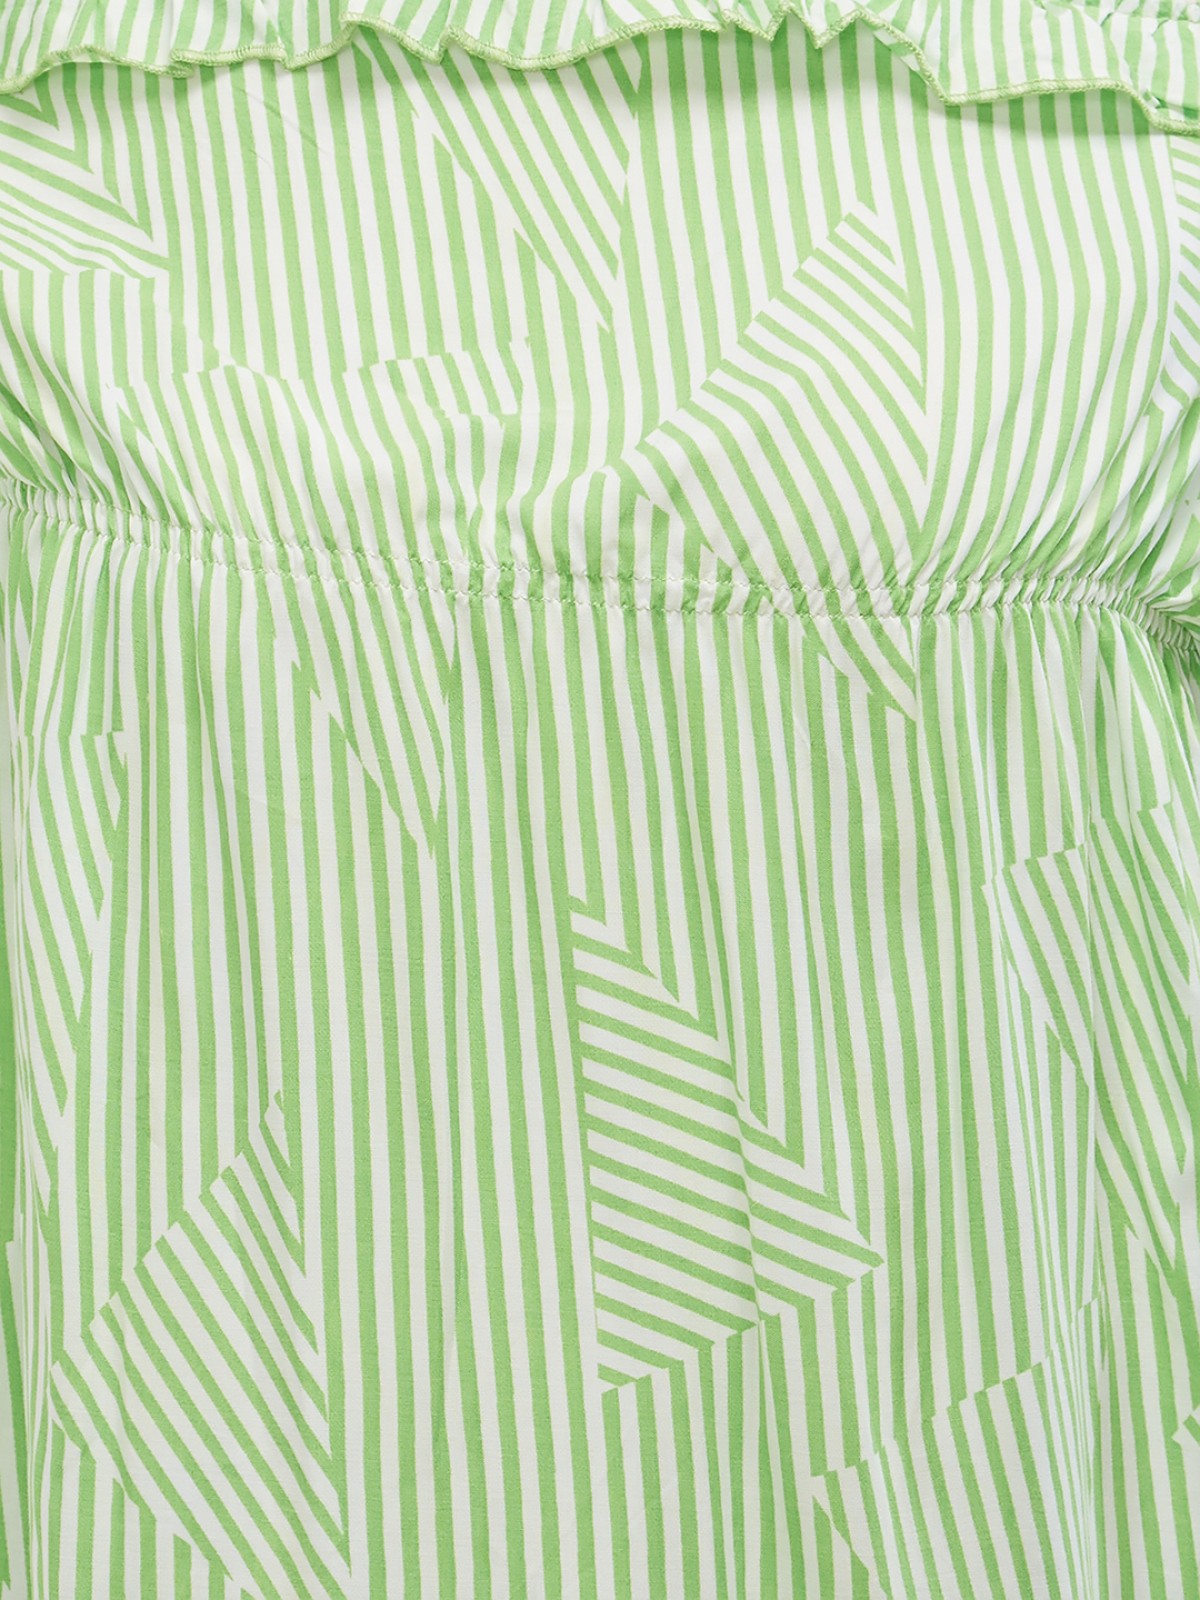 Elegore White Light Green Strappy Stripped Off Shoulder Top